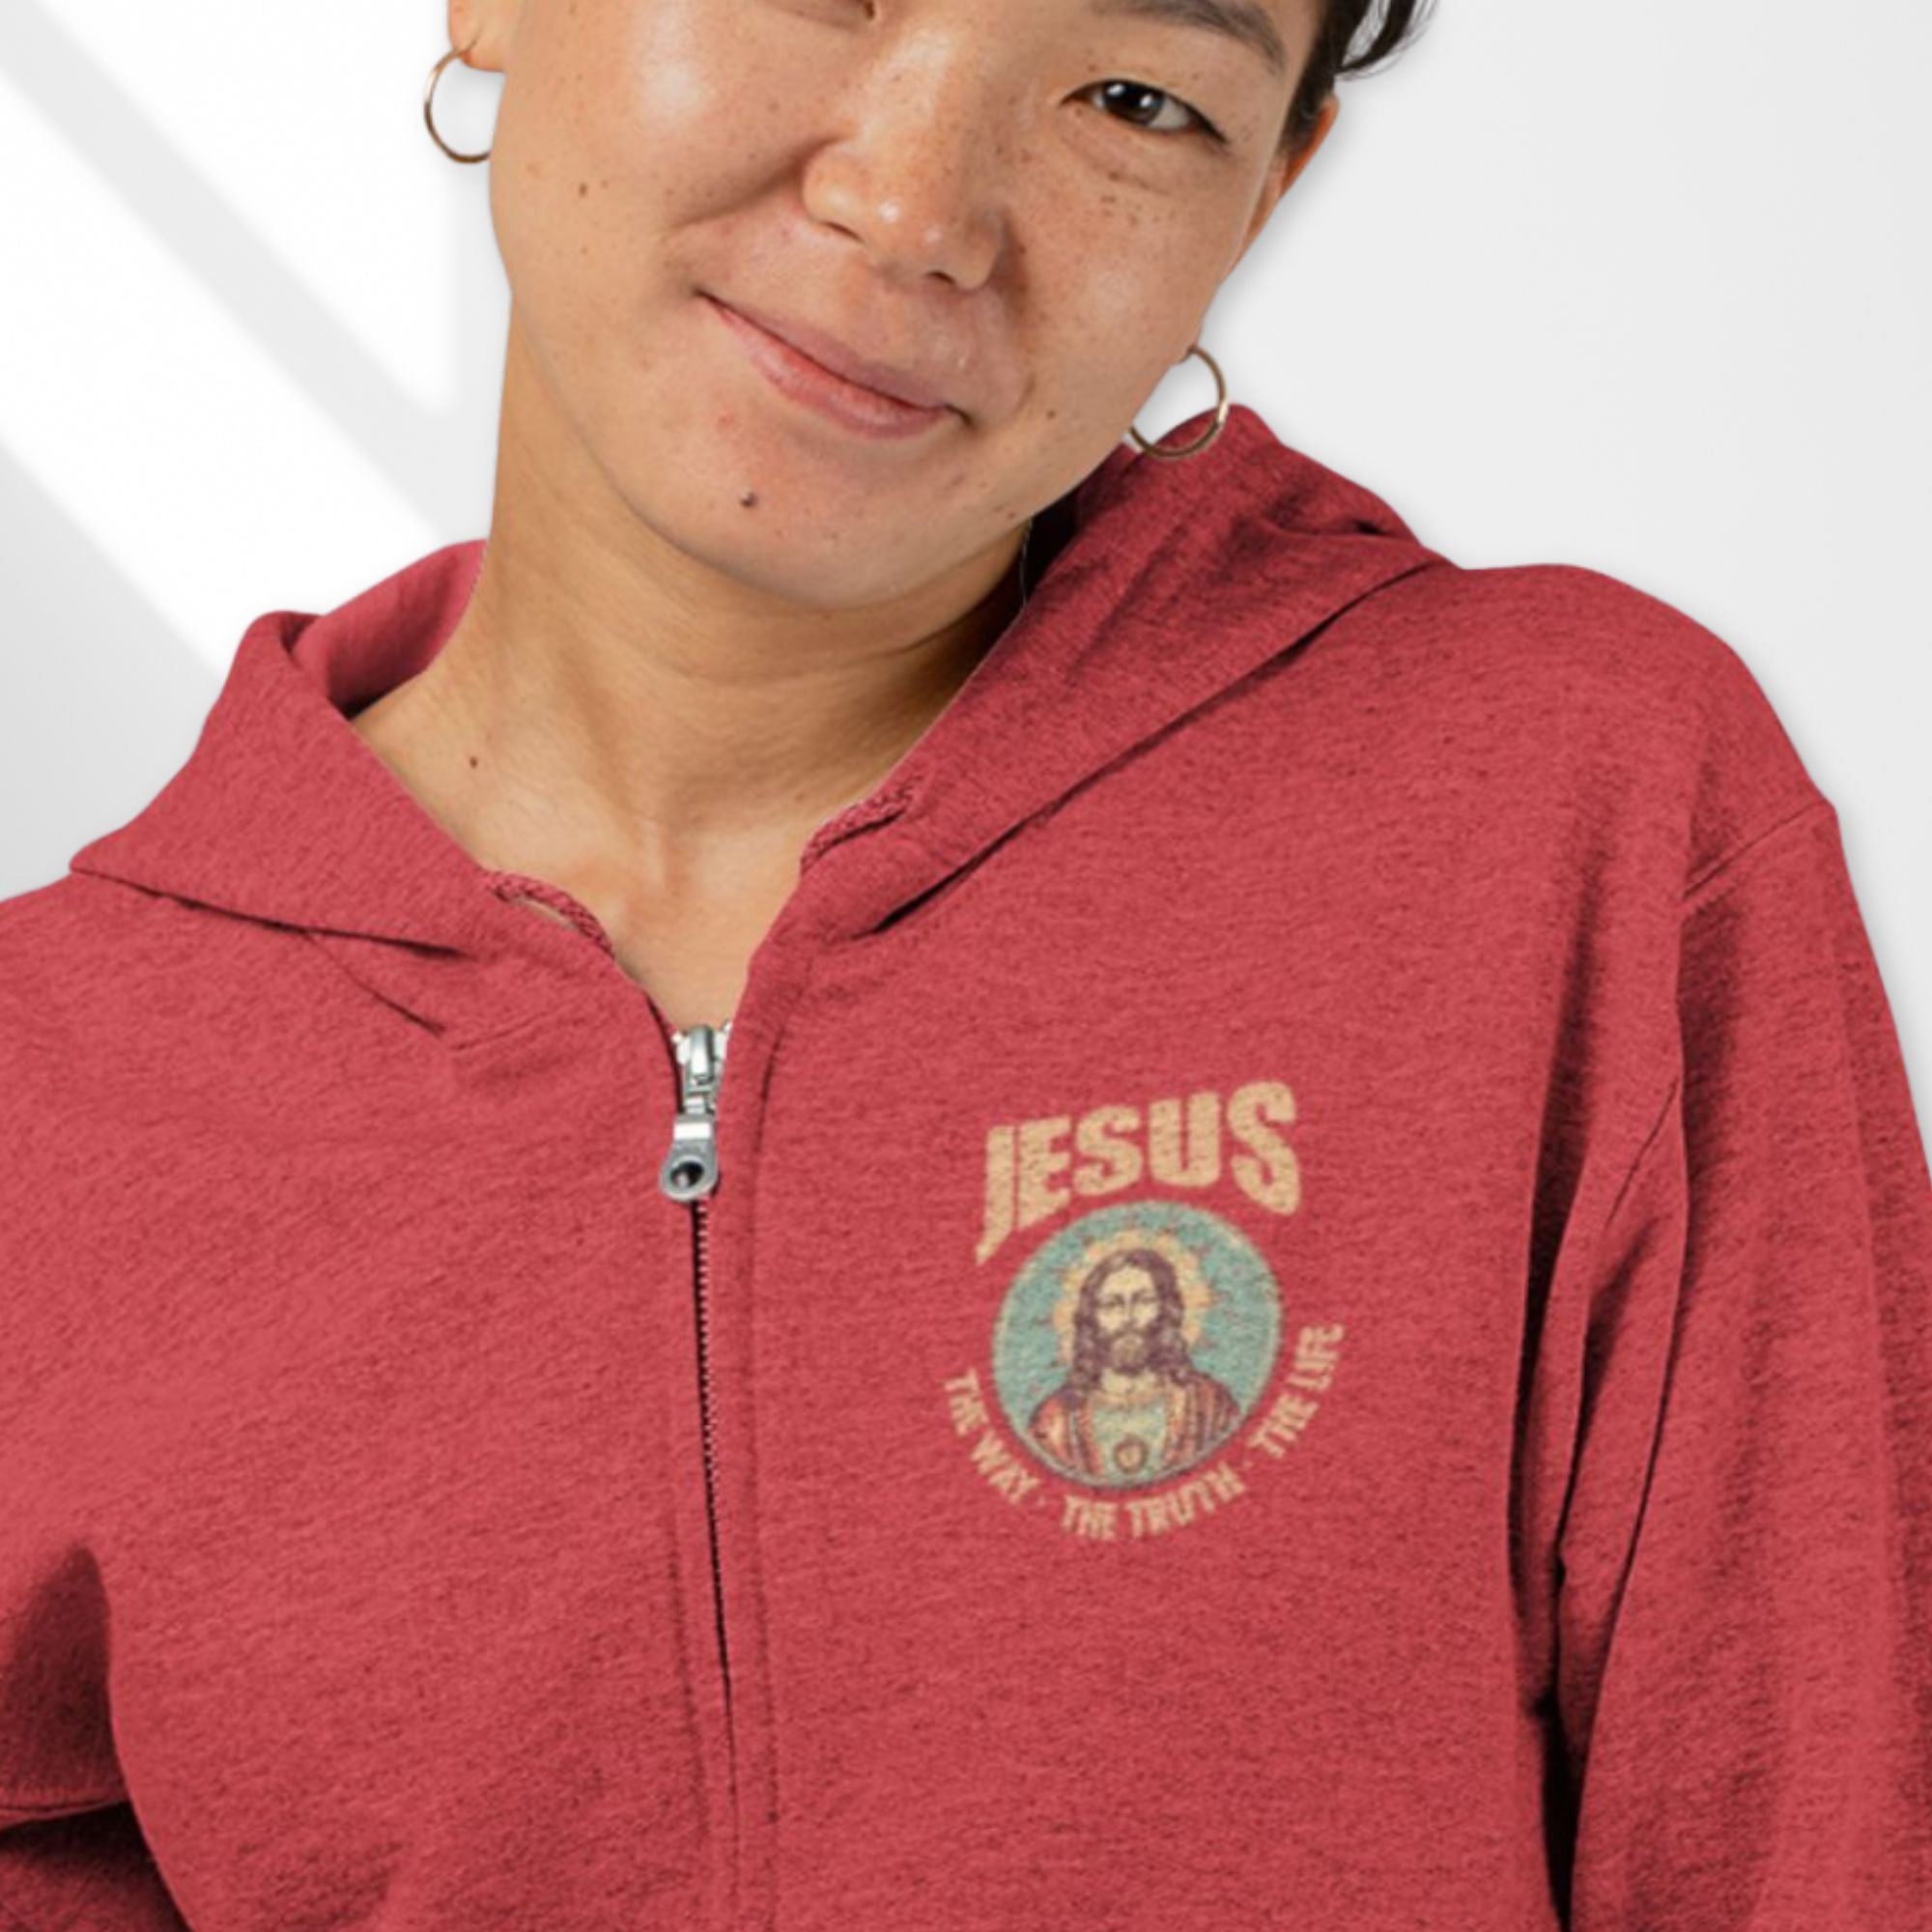 Jesus - The Way, Truth, Life Retro-Inspired Women's Jacket Heavy Blend™ Full Zip Hooded Sweatshirt Size: S Color: Red Jesus Passion Apparel